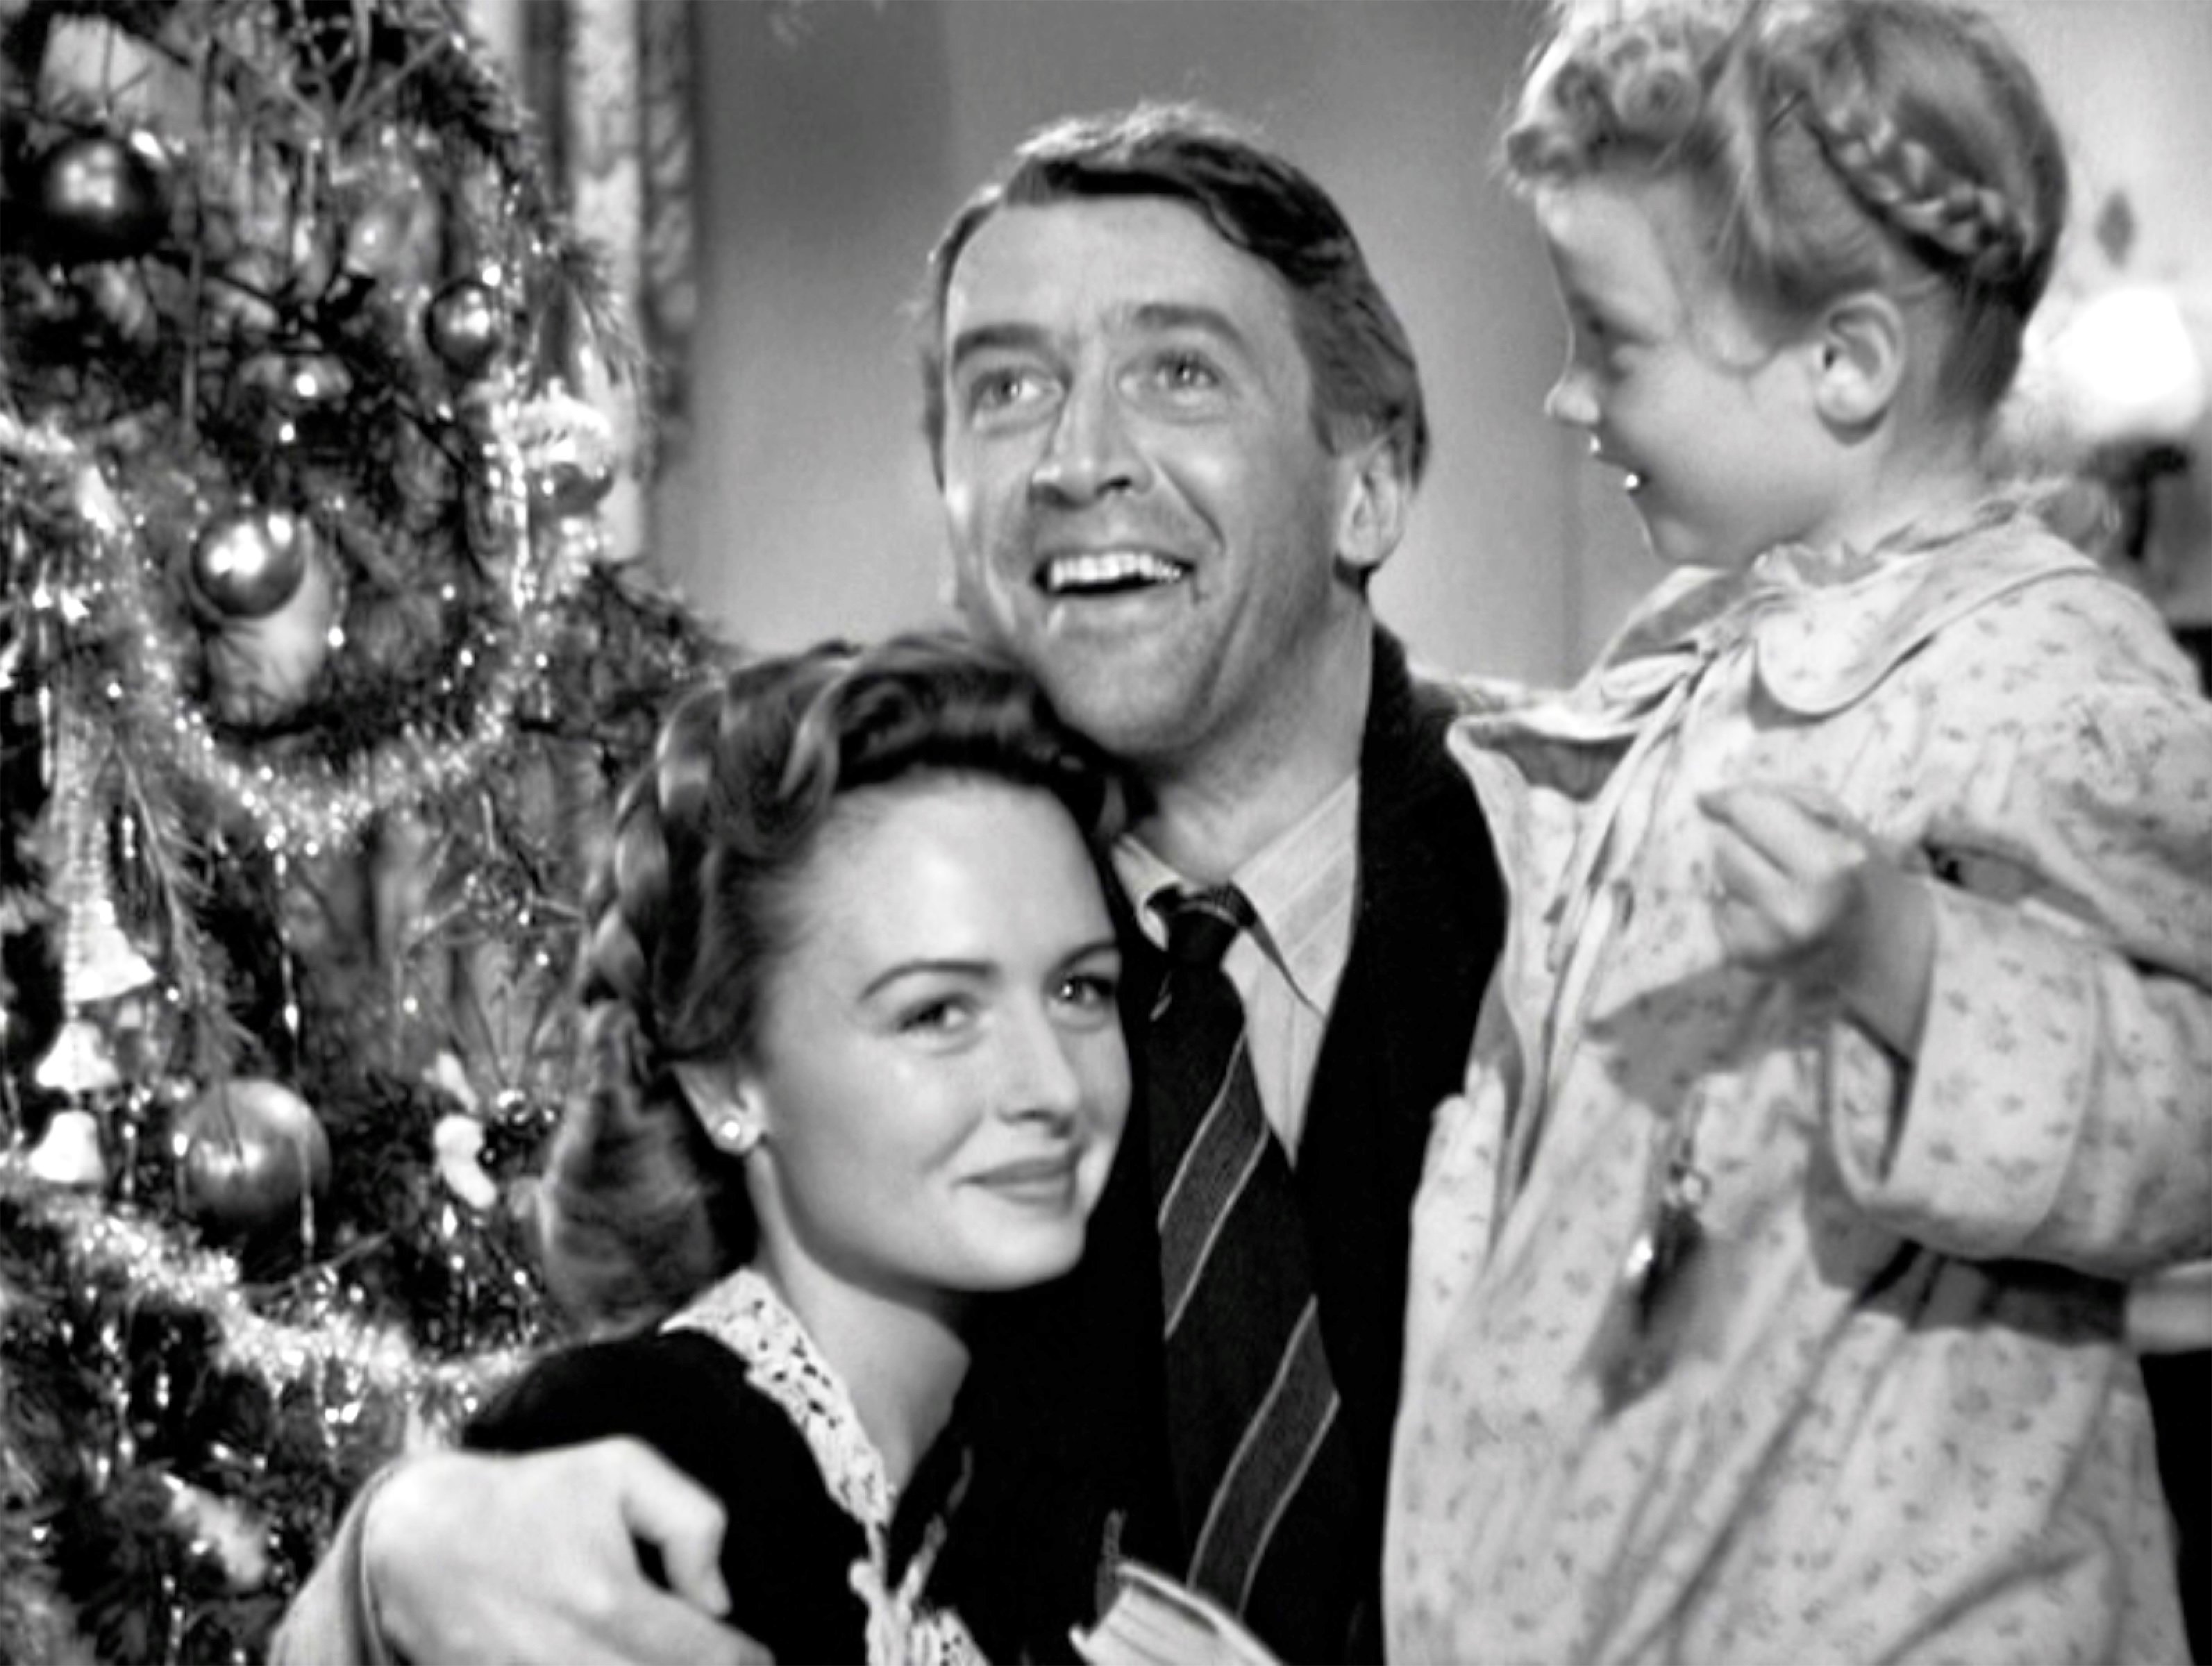 George Bailey surrounded by his wife and children at the end of 'It's a Wonderful Life'